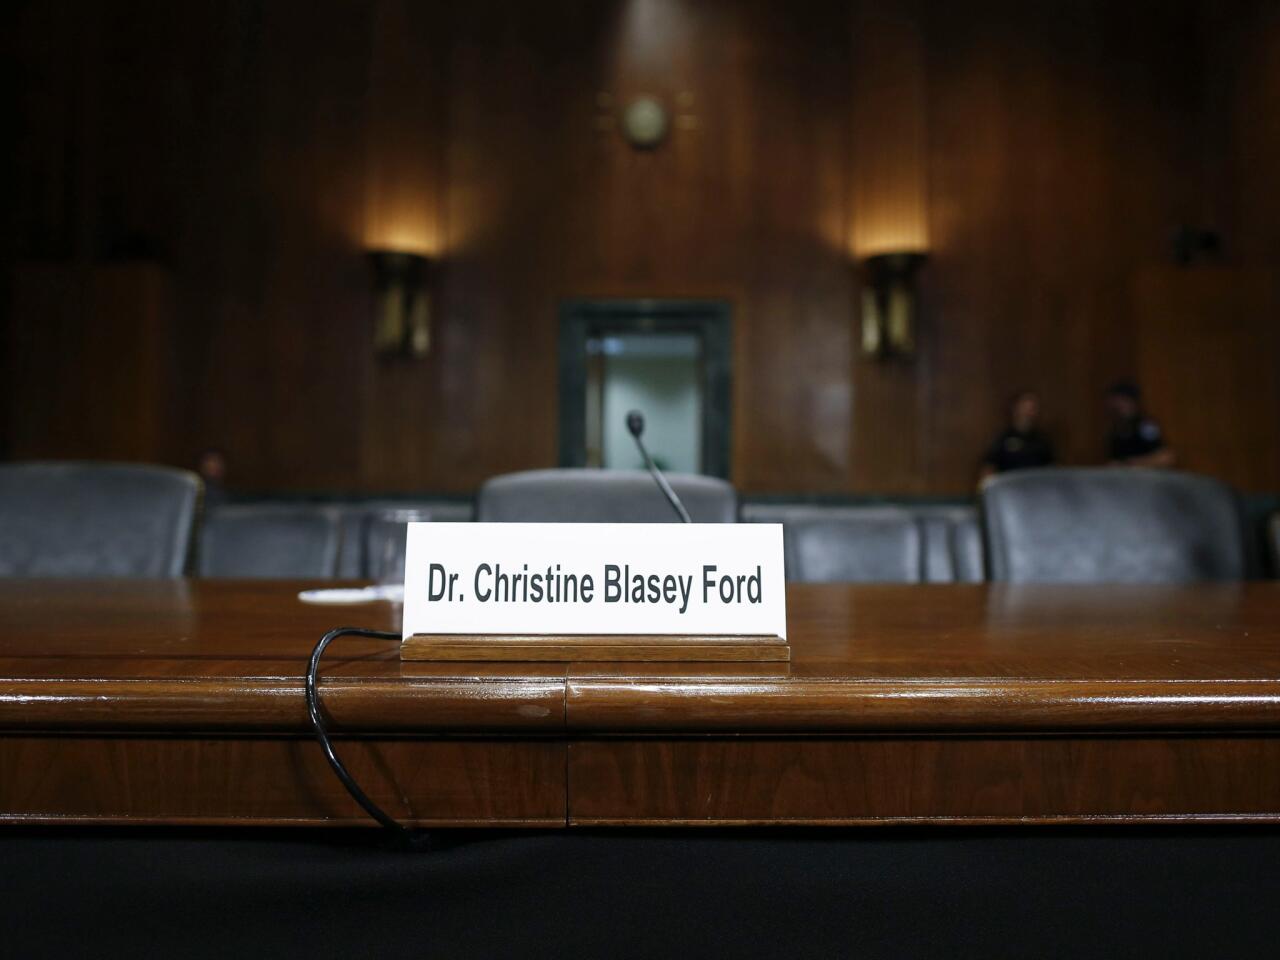 A sign indicates where witness Dr. Christine Blasey Ford will sit to speak to the Senate Judiciary Committee hearing on the nomination of Brett Kavanaugh to be an associate justice of the Supreme Court.